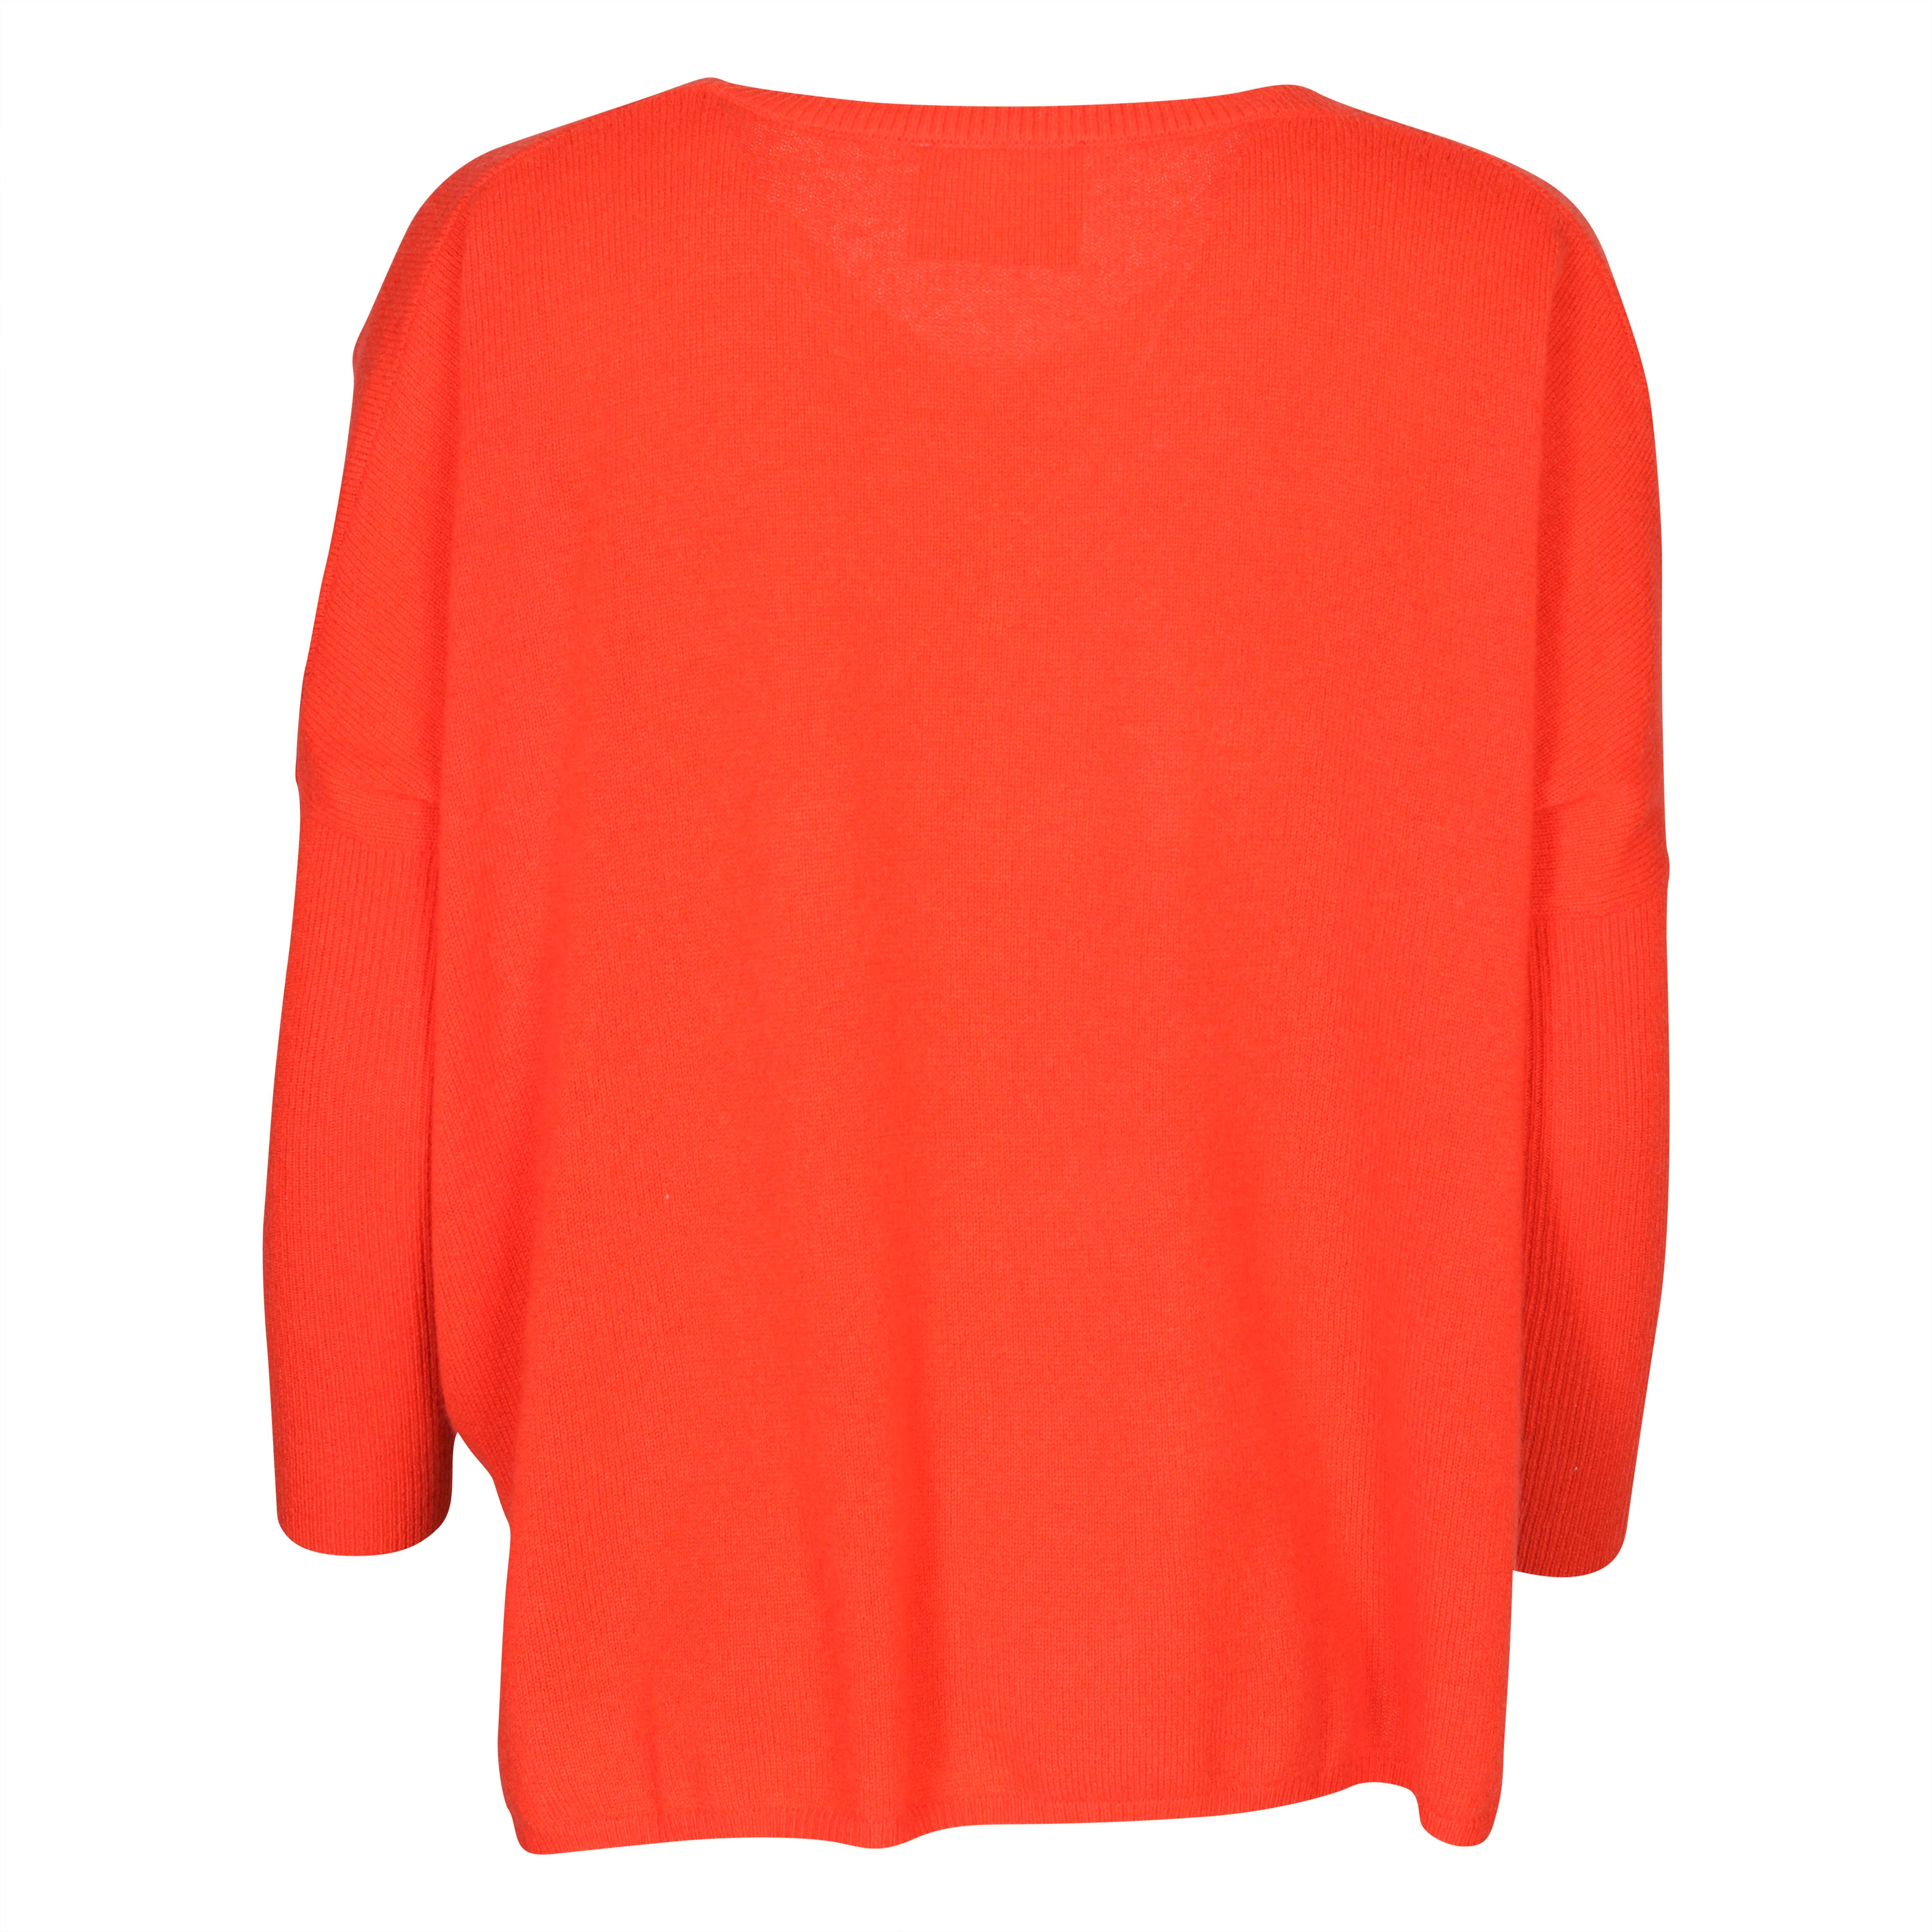 Absolut Cashmere Poncho Sweater in Orange